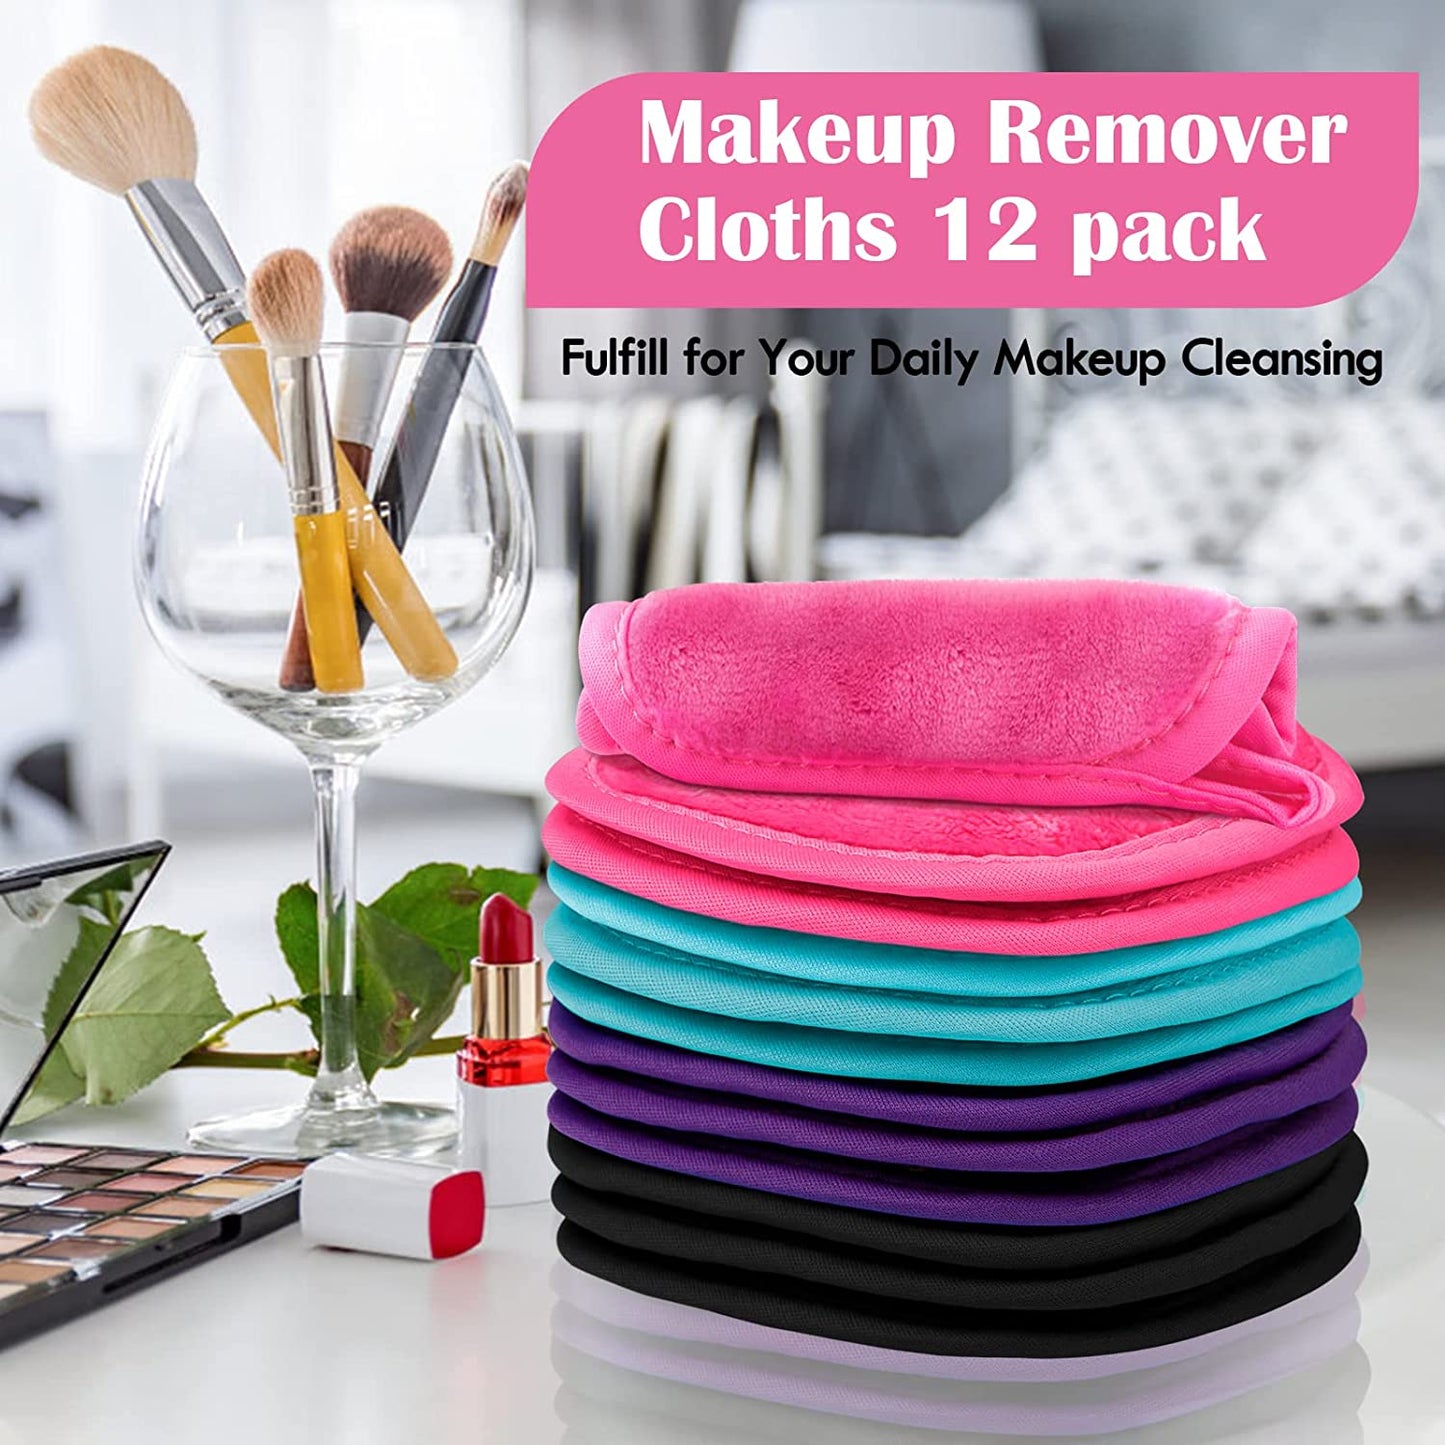 Makeup Remover Cloths 12 Pack, Makeup Removal Face Cleansing Cloth, Reusable Makeup Remover Pads Remove Instantly Dirt with Just Water, 5 X 5 In